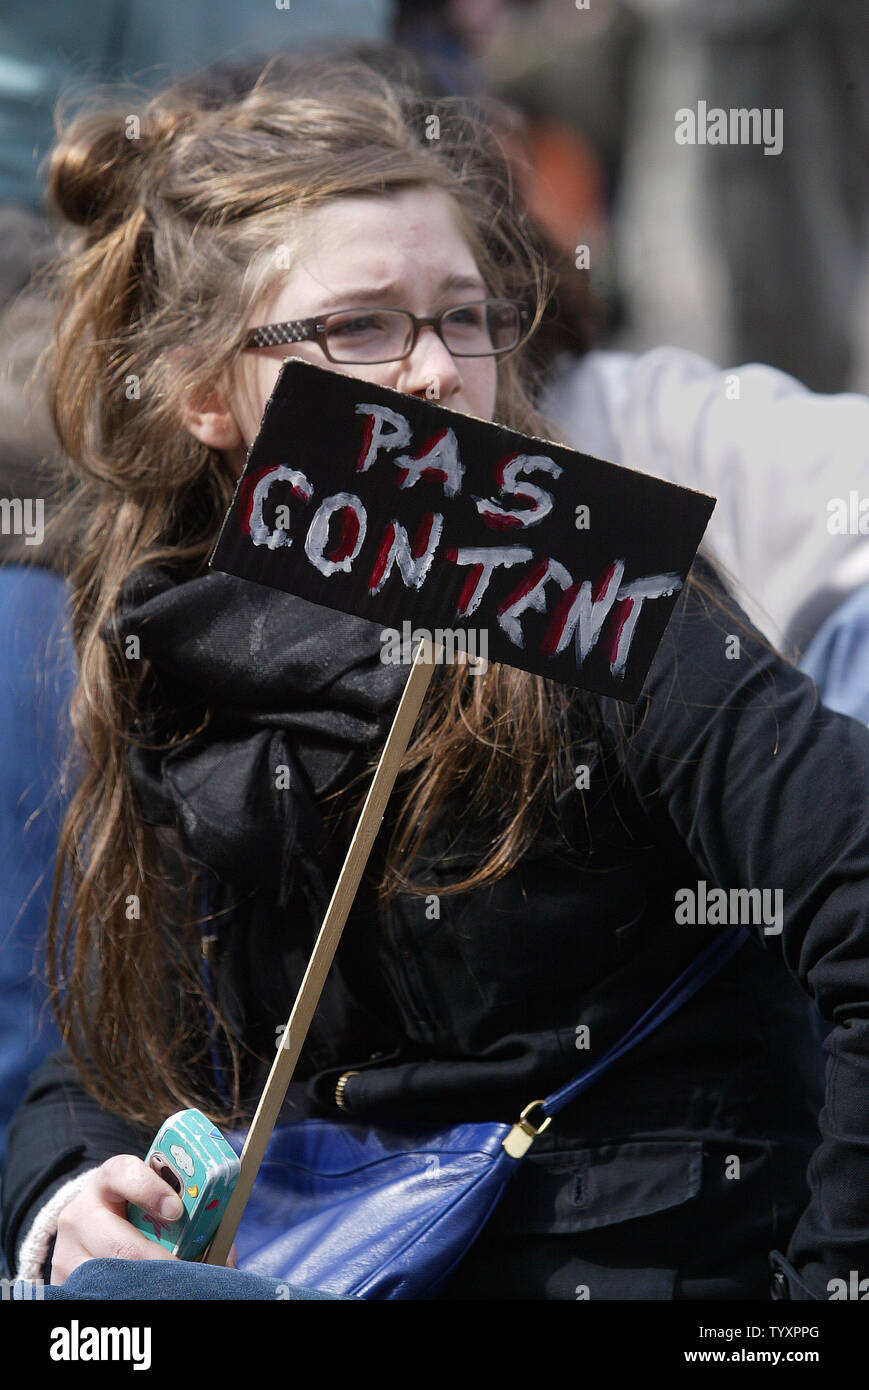 A French student holds a sign that reads 'Not Happy'  during a protest march along one of Paris' main avenues April 11, 2006. Hundreds of students, emboldened by President Jacques Chirac's cave-in on the First Employment Contract (CPE), went ahead with a pre-planned demonstration in a bid to get rid of other government labor reforms.  (UPI Photo/Eco Clement) Stock Photo